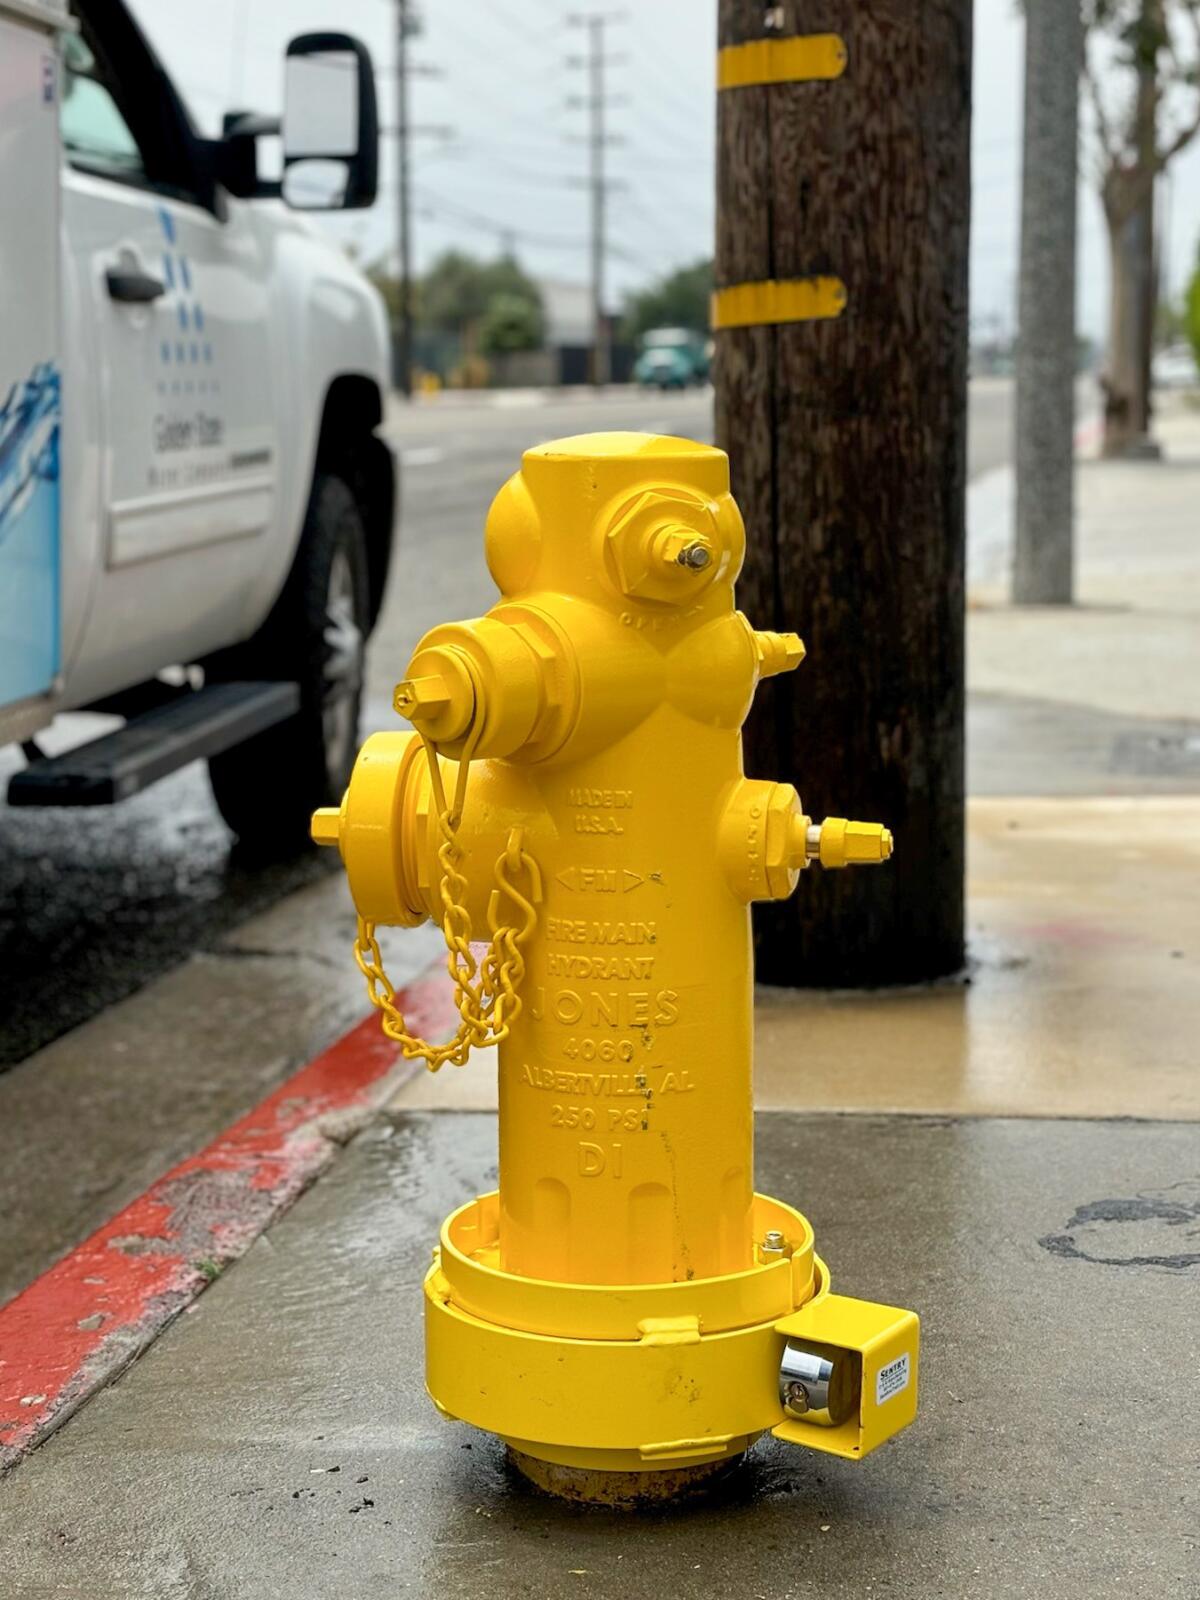 A new fire hydrant design is seen on Florence Graham off  82nd and Hooper Avenue in Los Angeles.